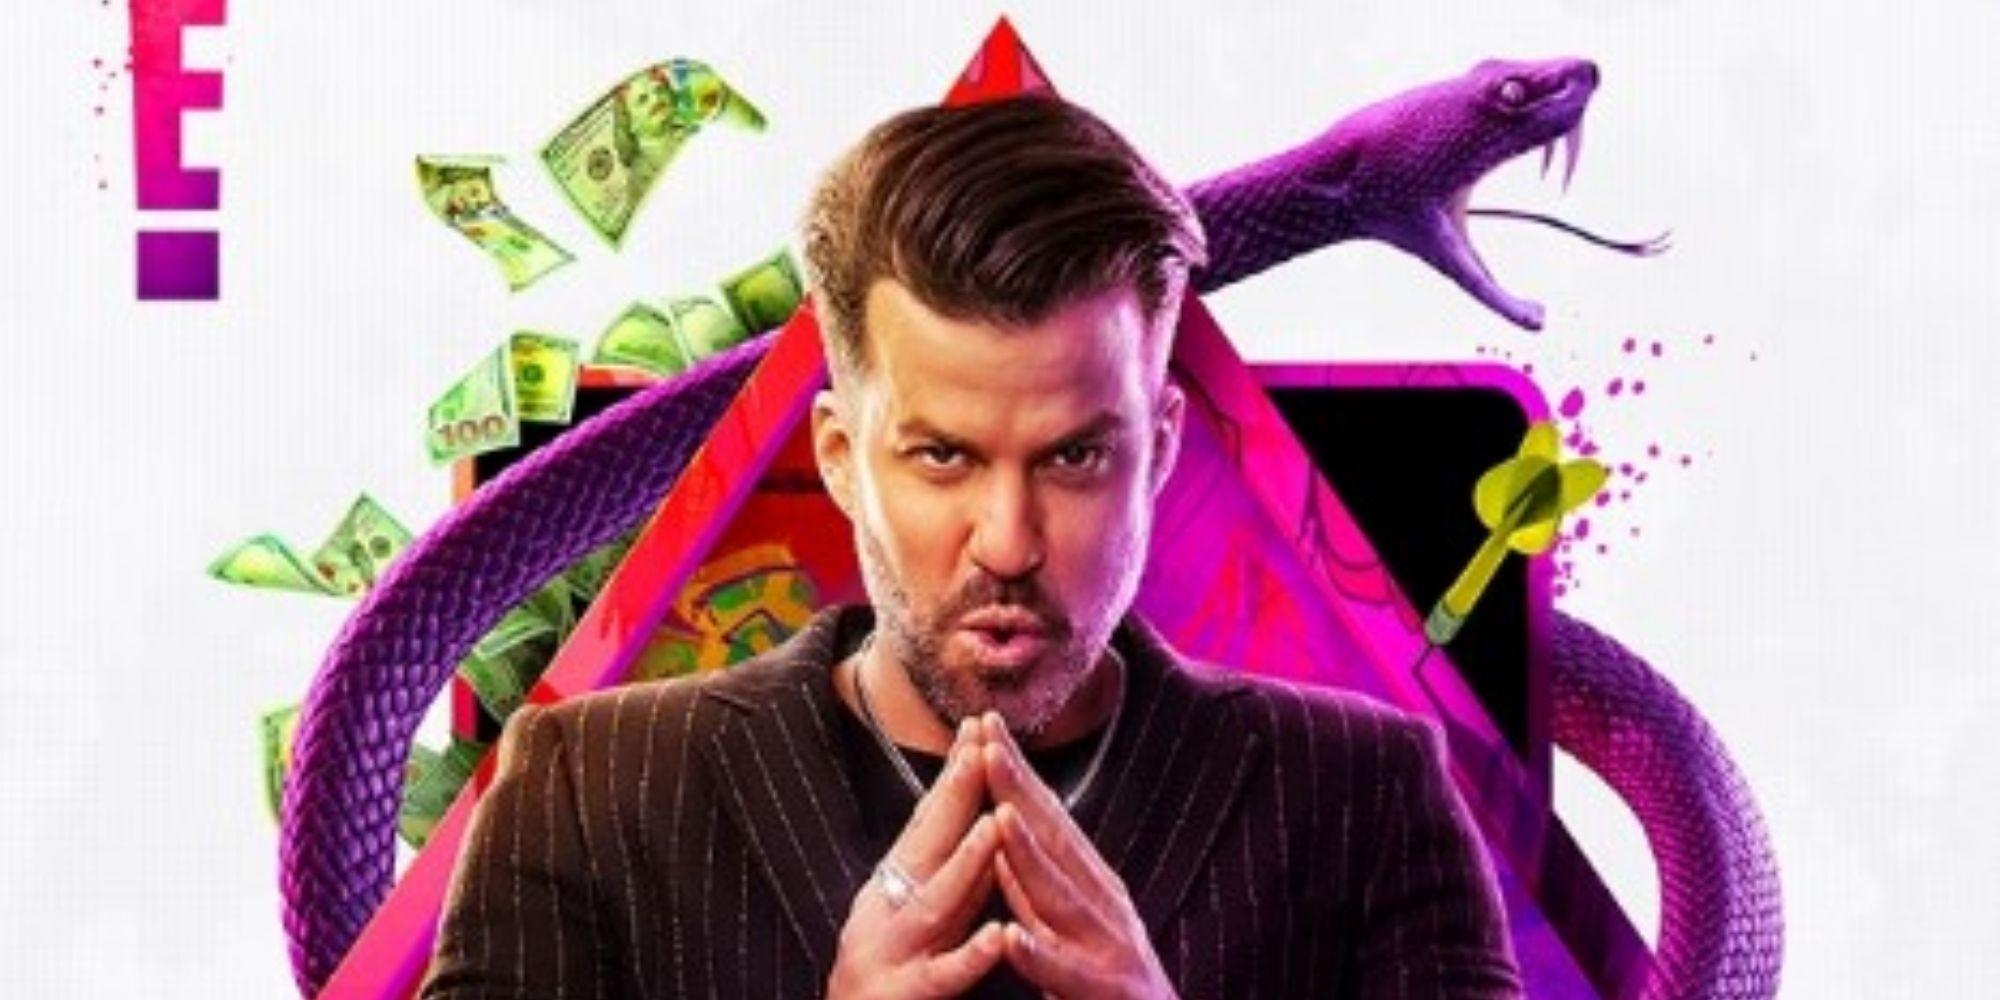 Johnny Bananas looks at the camera with a purple snake and money behind him in the 'House of Villains' cast photo.